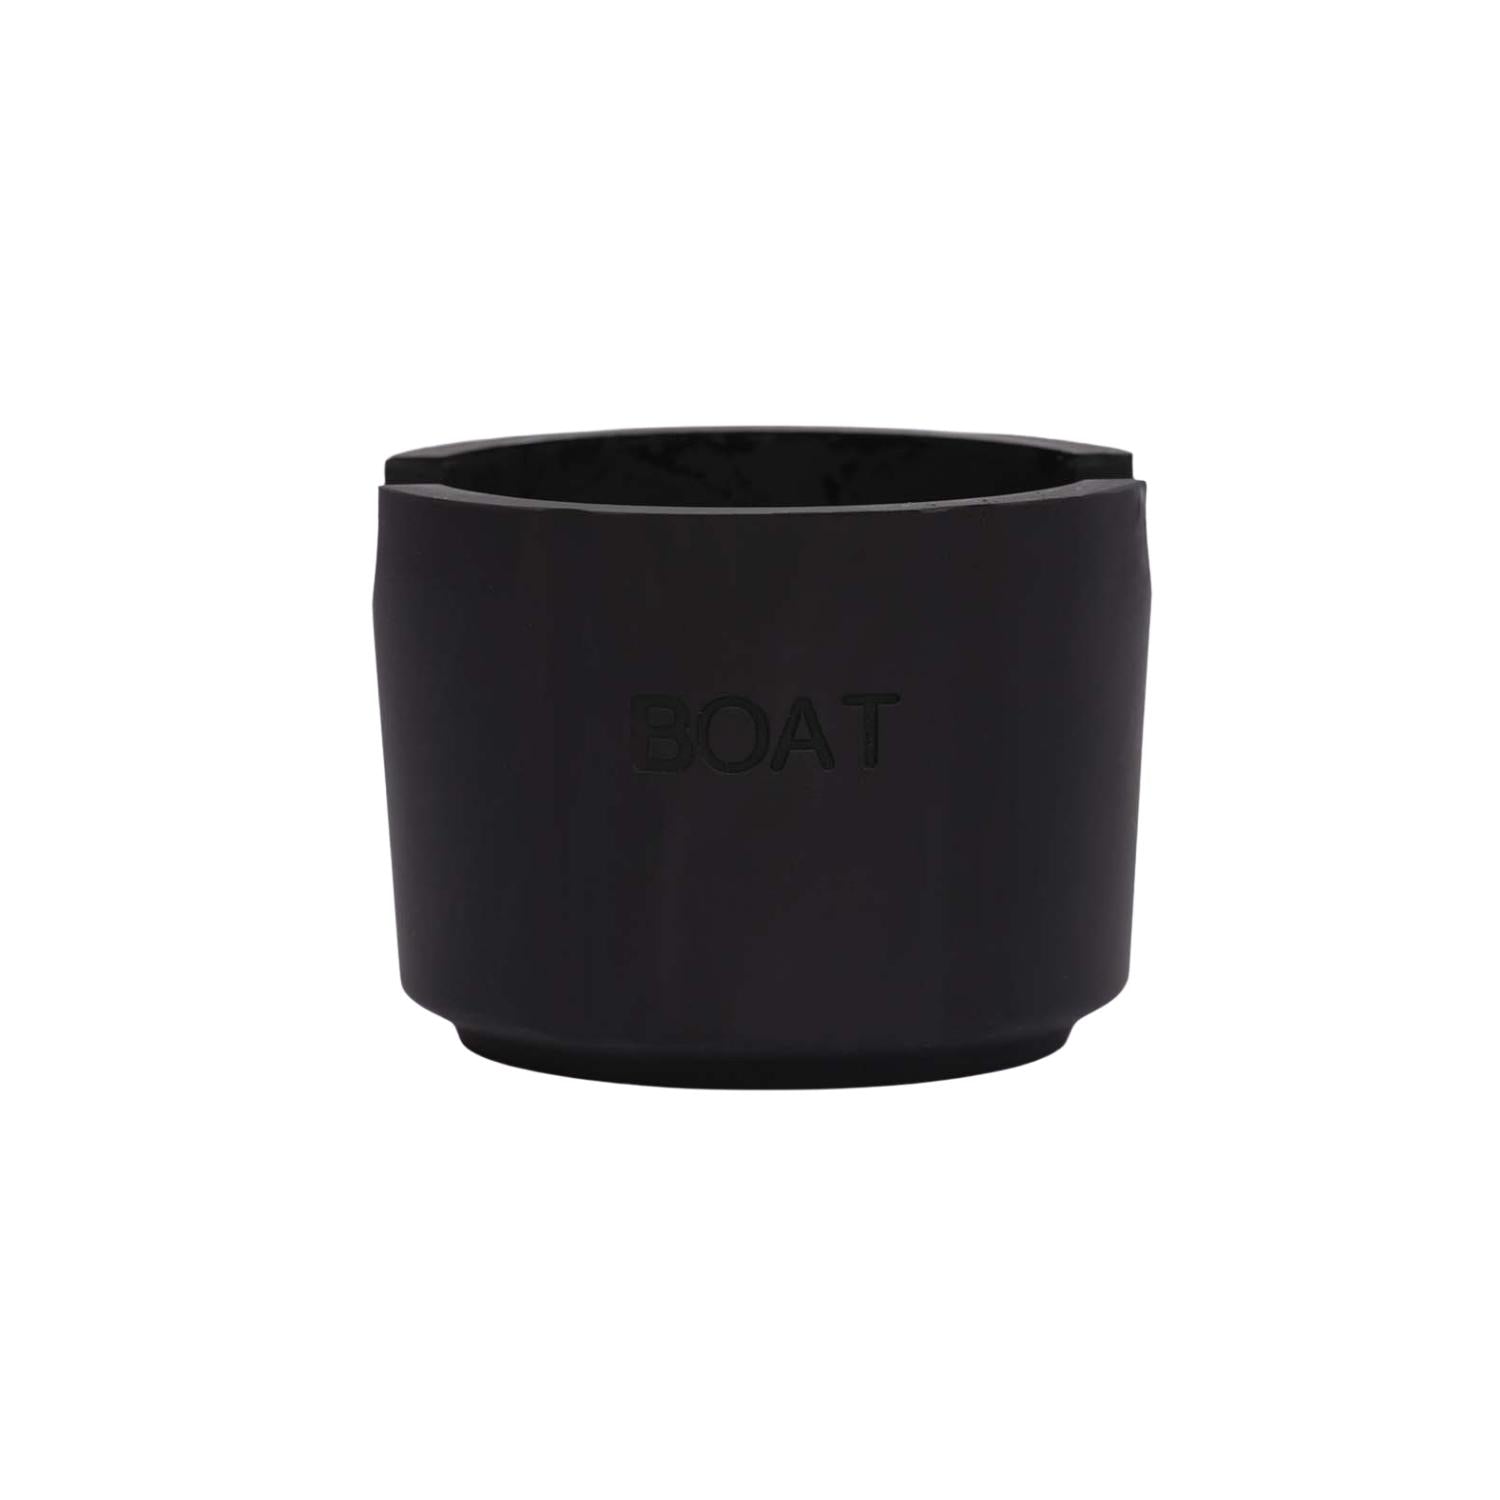 Large Black Polymer Ring for Star Cup Holder and Boat Cup Holders